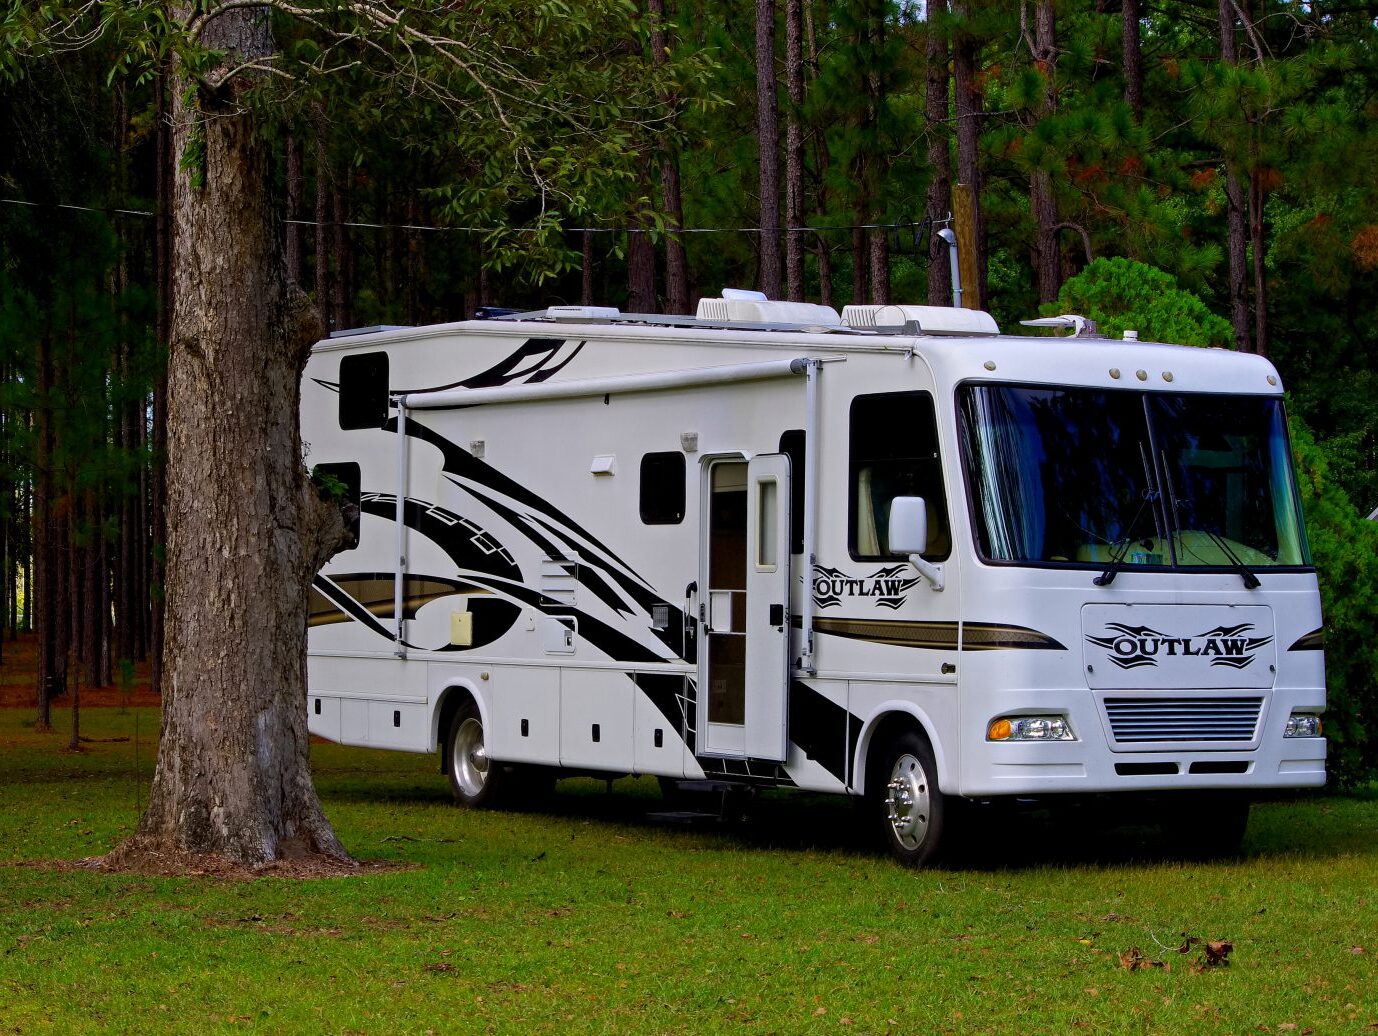 Top Class A RVs Ranked